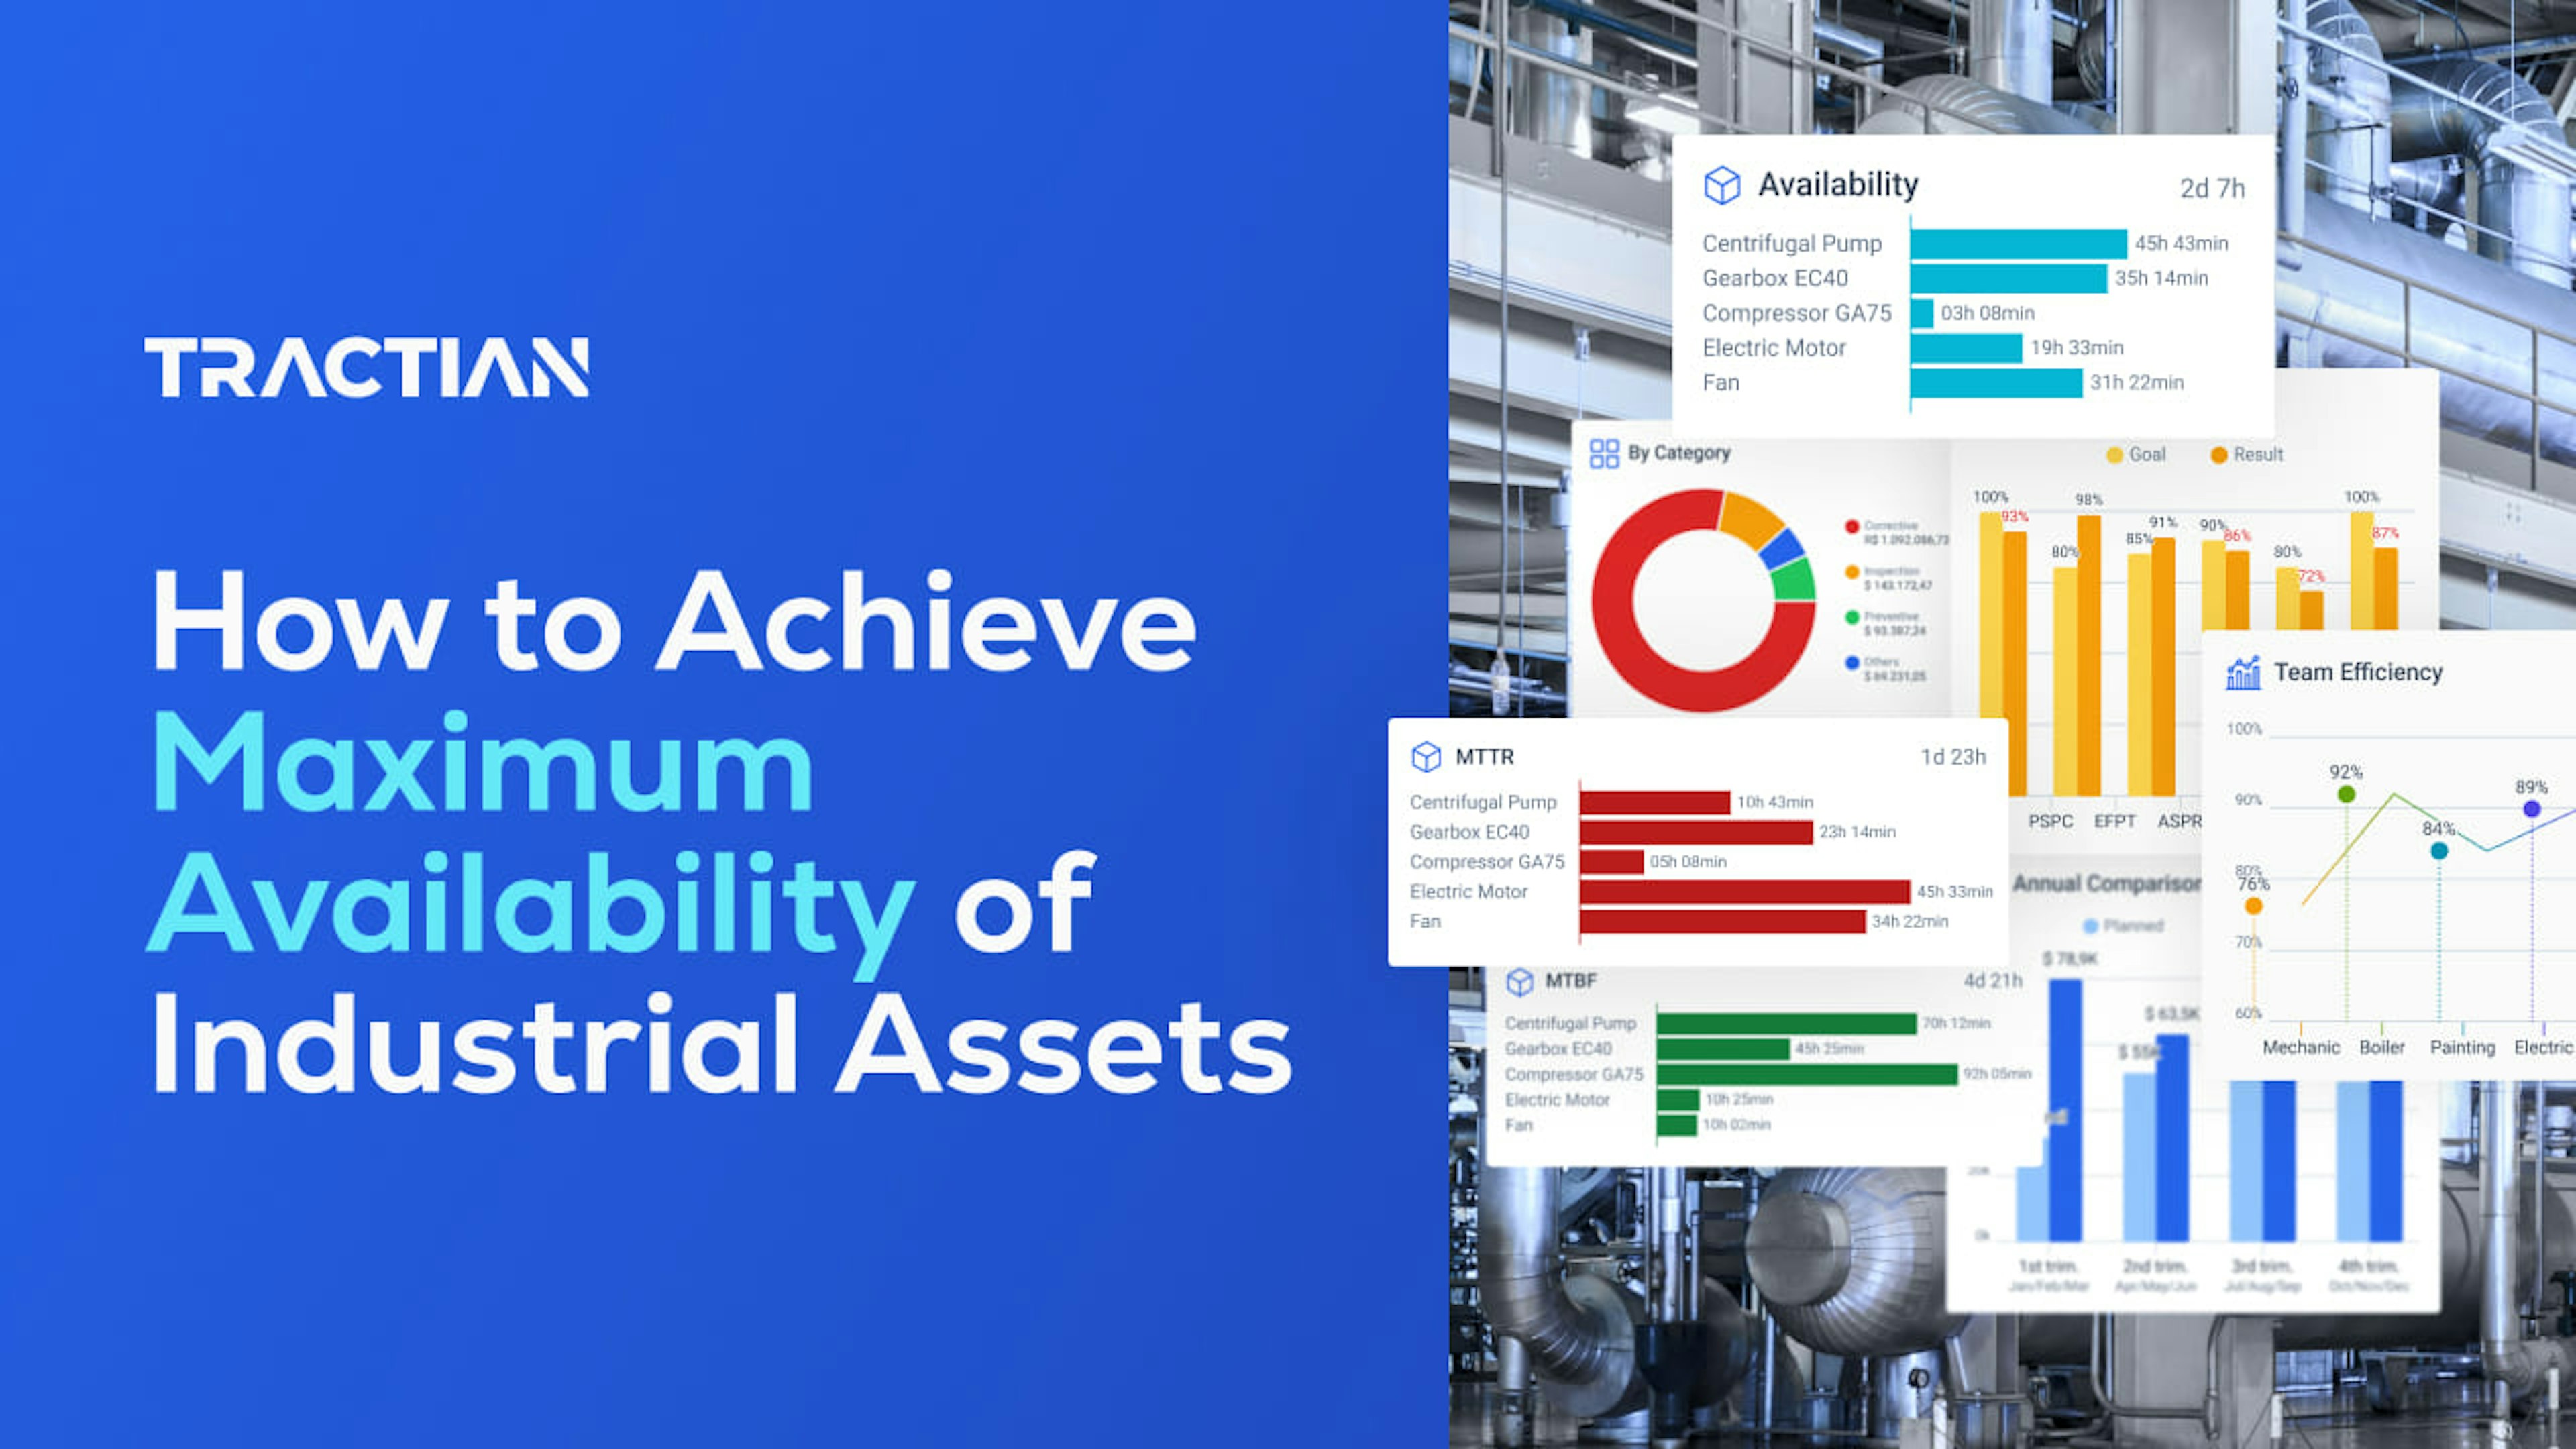 How to Achieve Maximum Industrial Asset Availability